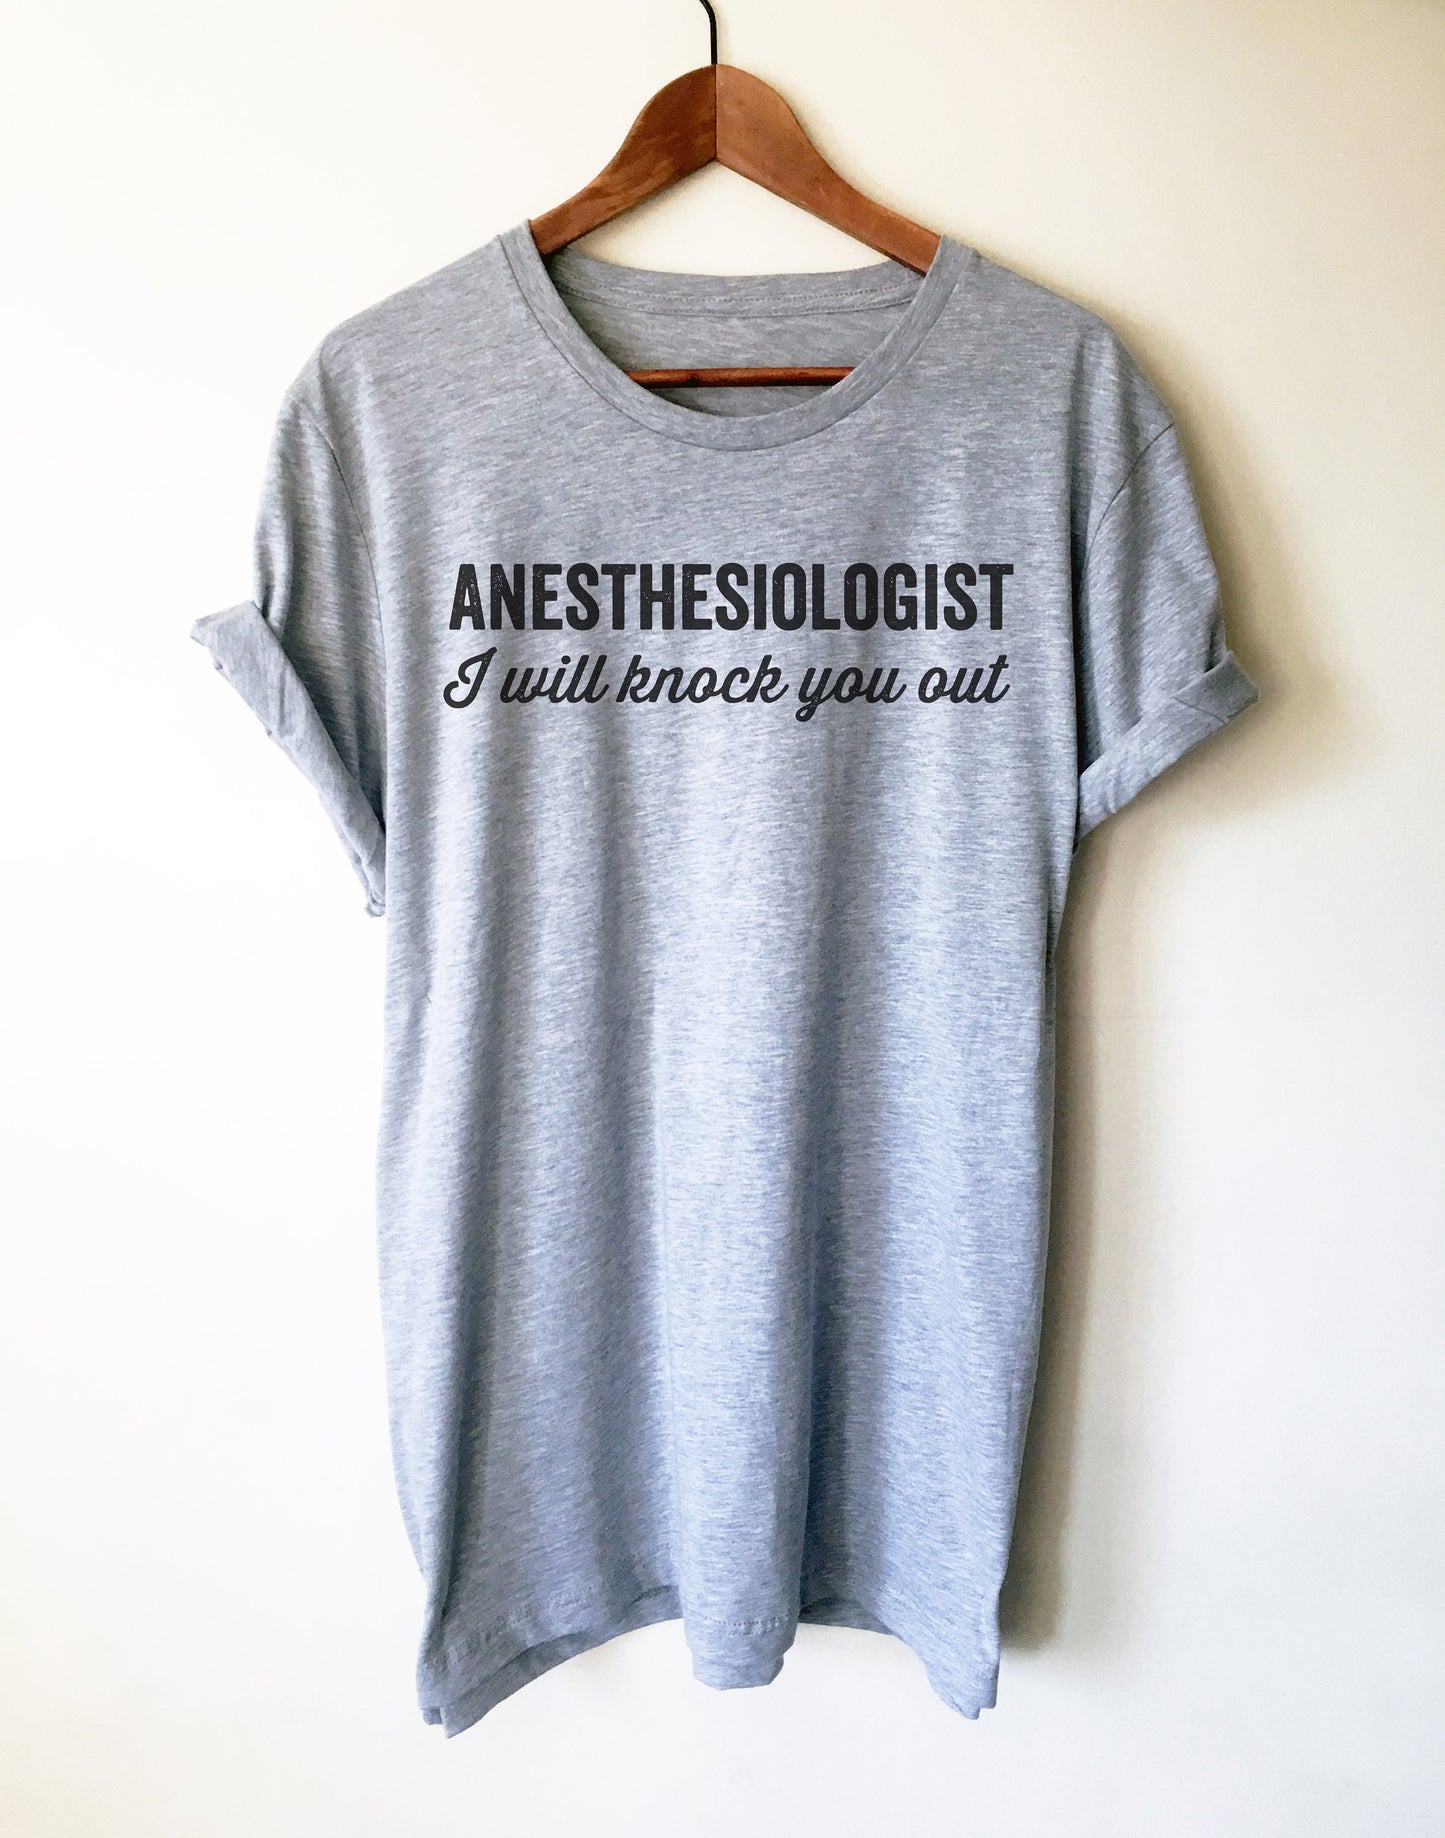 Anesthesiologist I Will Knock You Out Unisex Shirt - Anesthesiologist Shirt, Medical Student Gift, Nursing Student, Doctor Shirt, RN Shirt